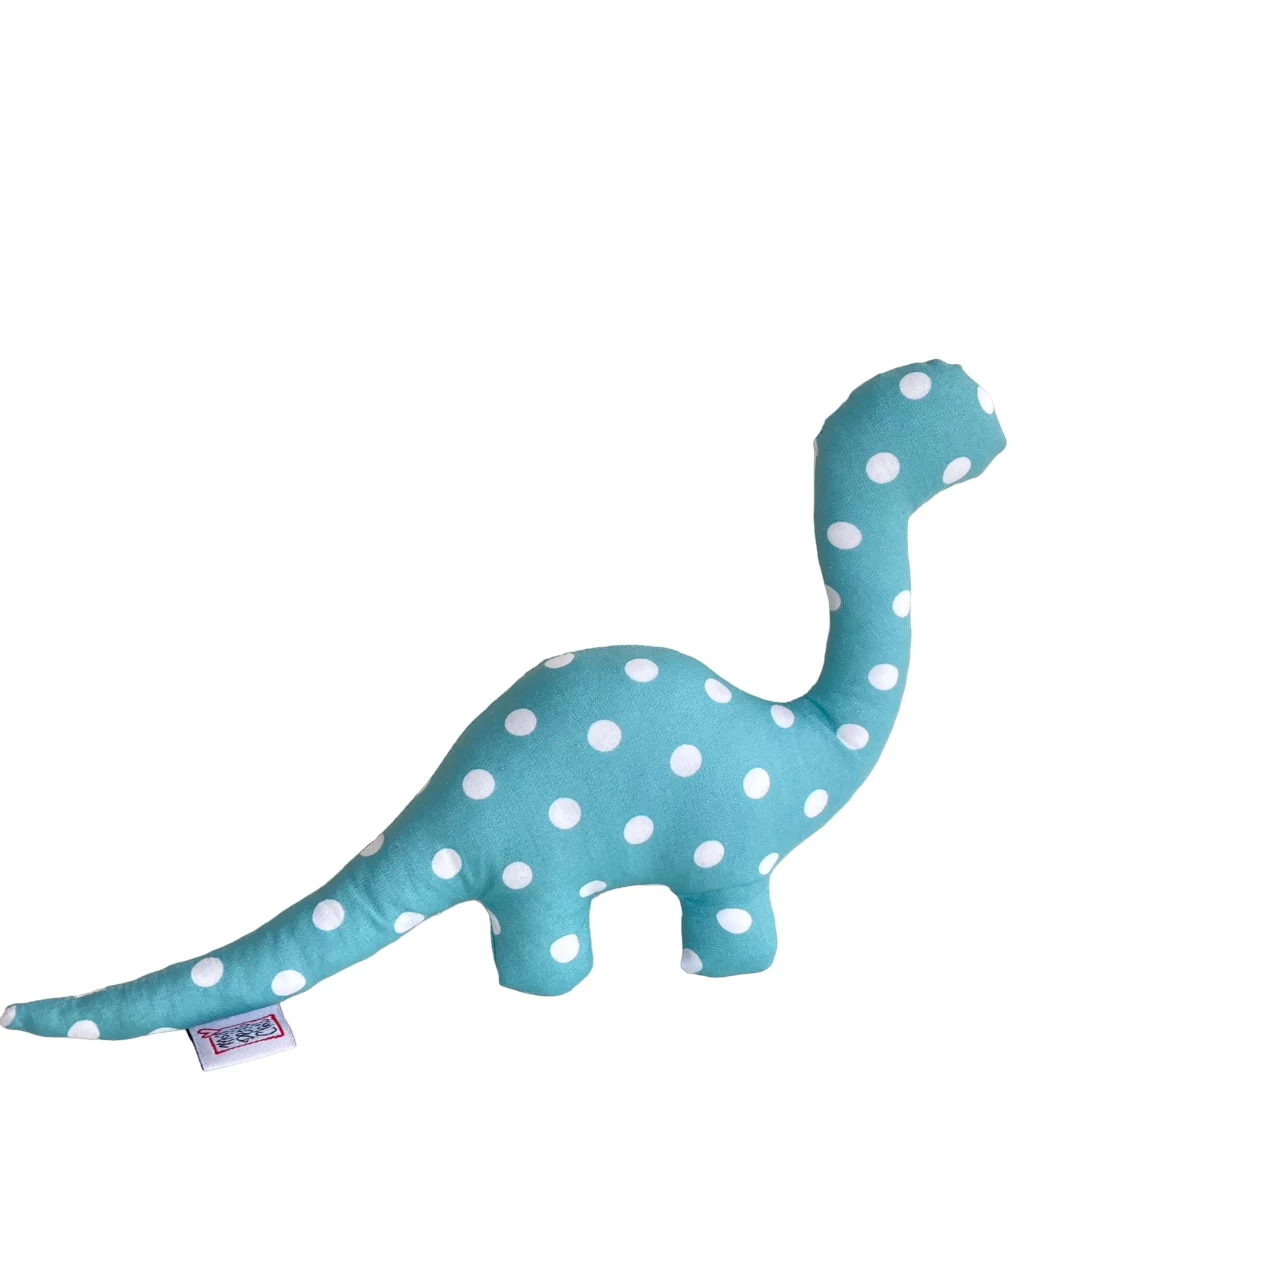 the little dino!